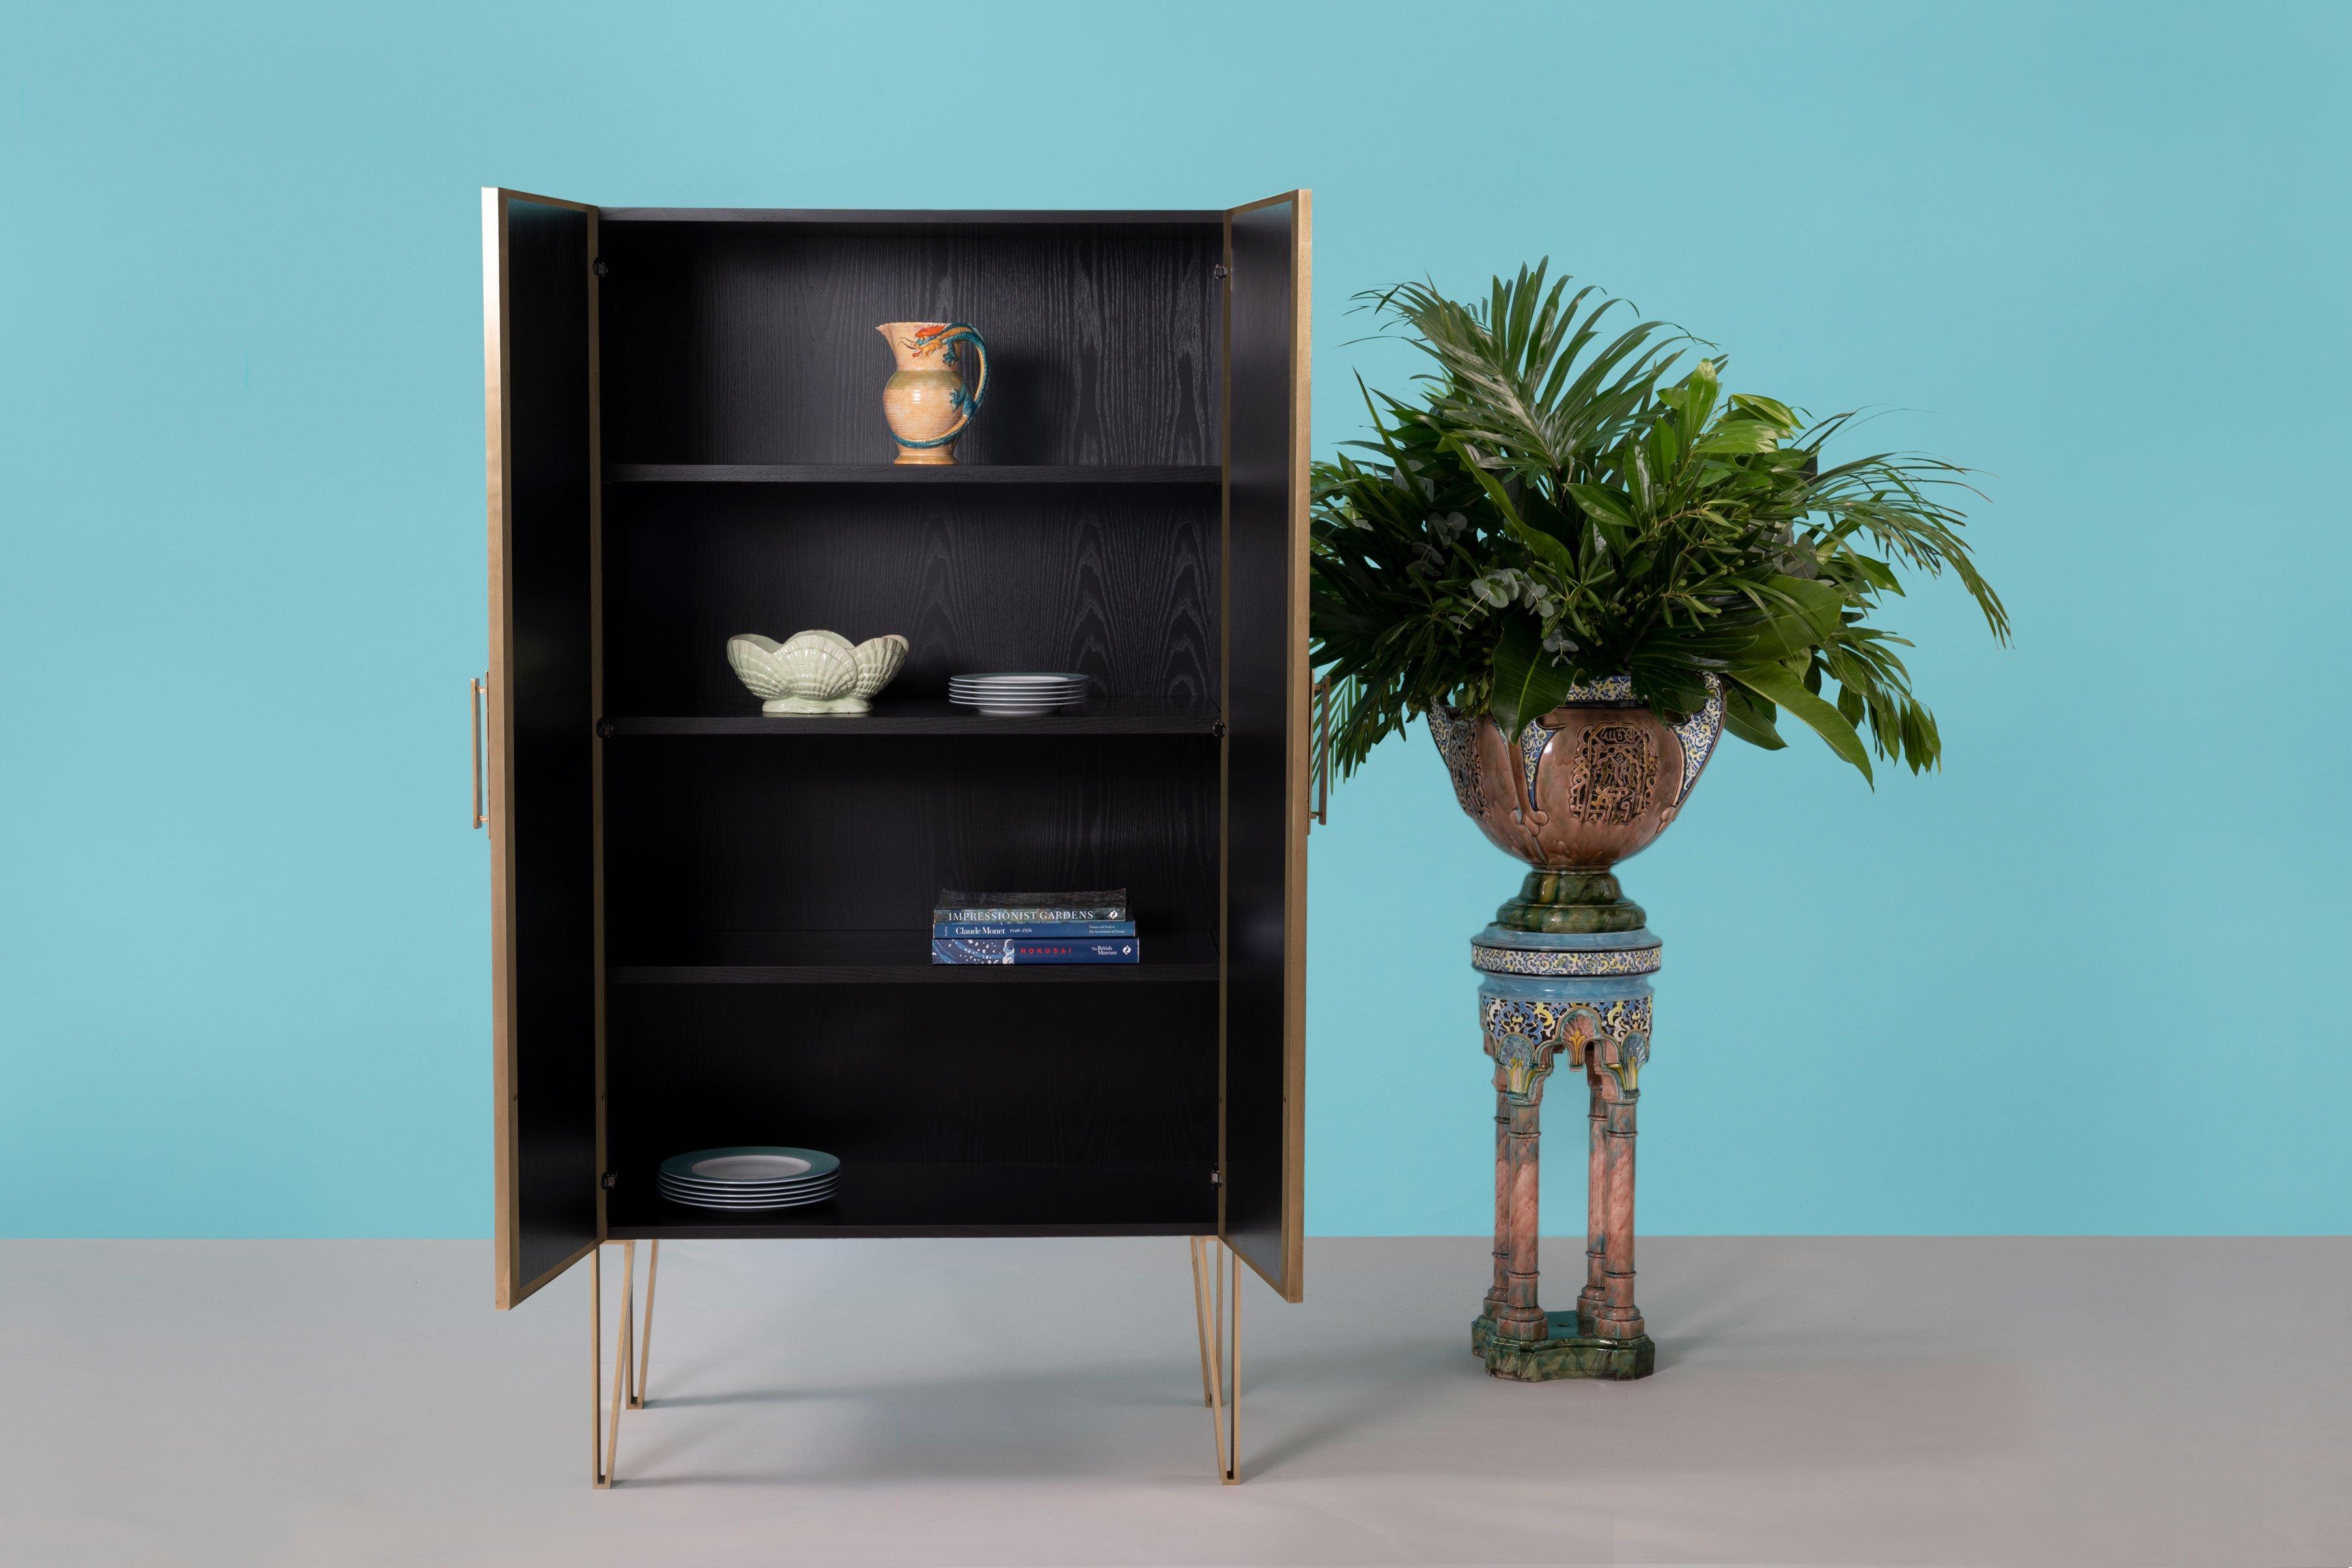 Fine Upholstered in Amy Molyneaux’s striking Tile print, the Cordelia cabinet is a bold, confident choice for any interior.

Handcrafted in England from lacquered oak wood, this statement piece is upholstered in sumptuous silk-blend satin and